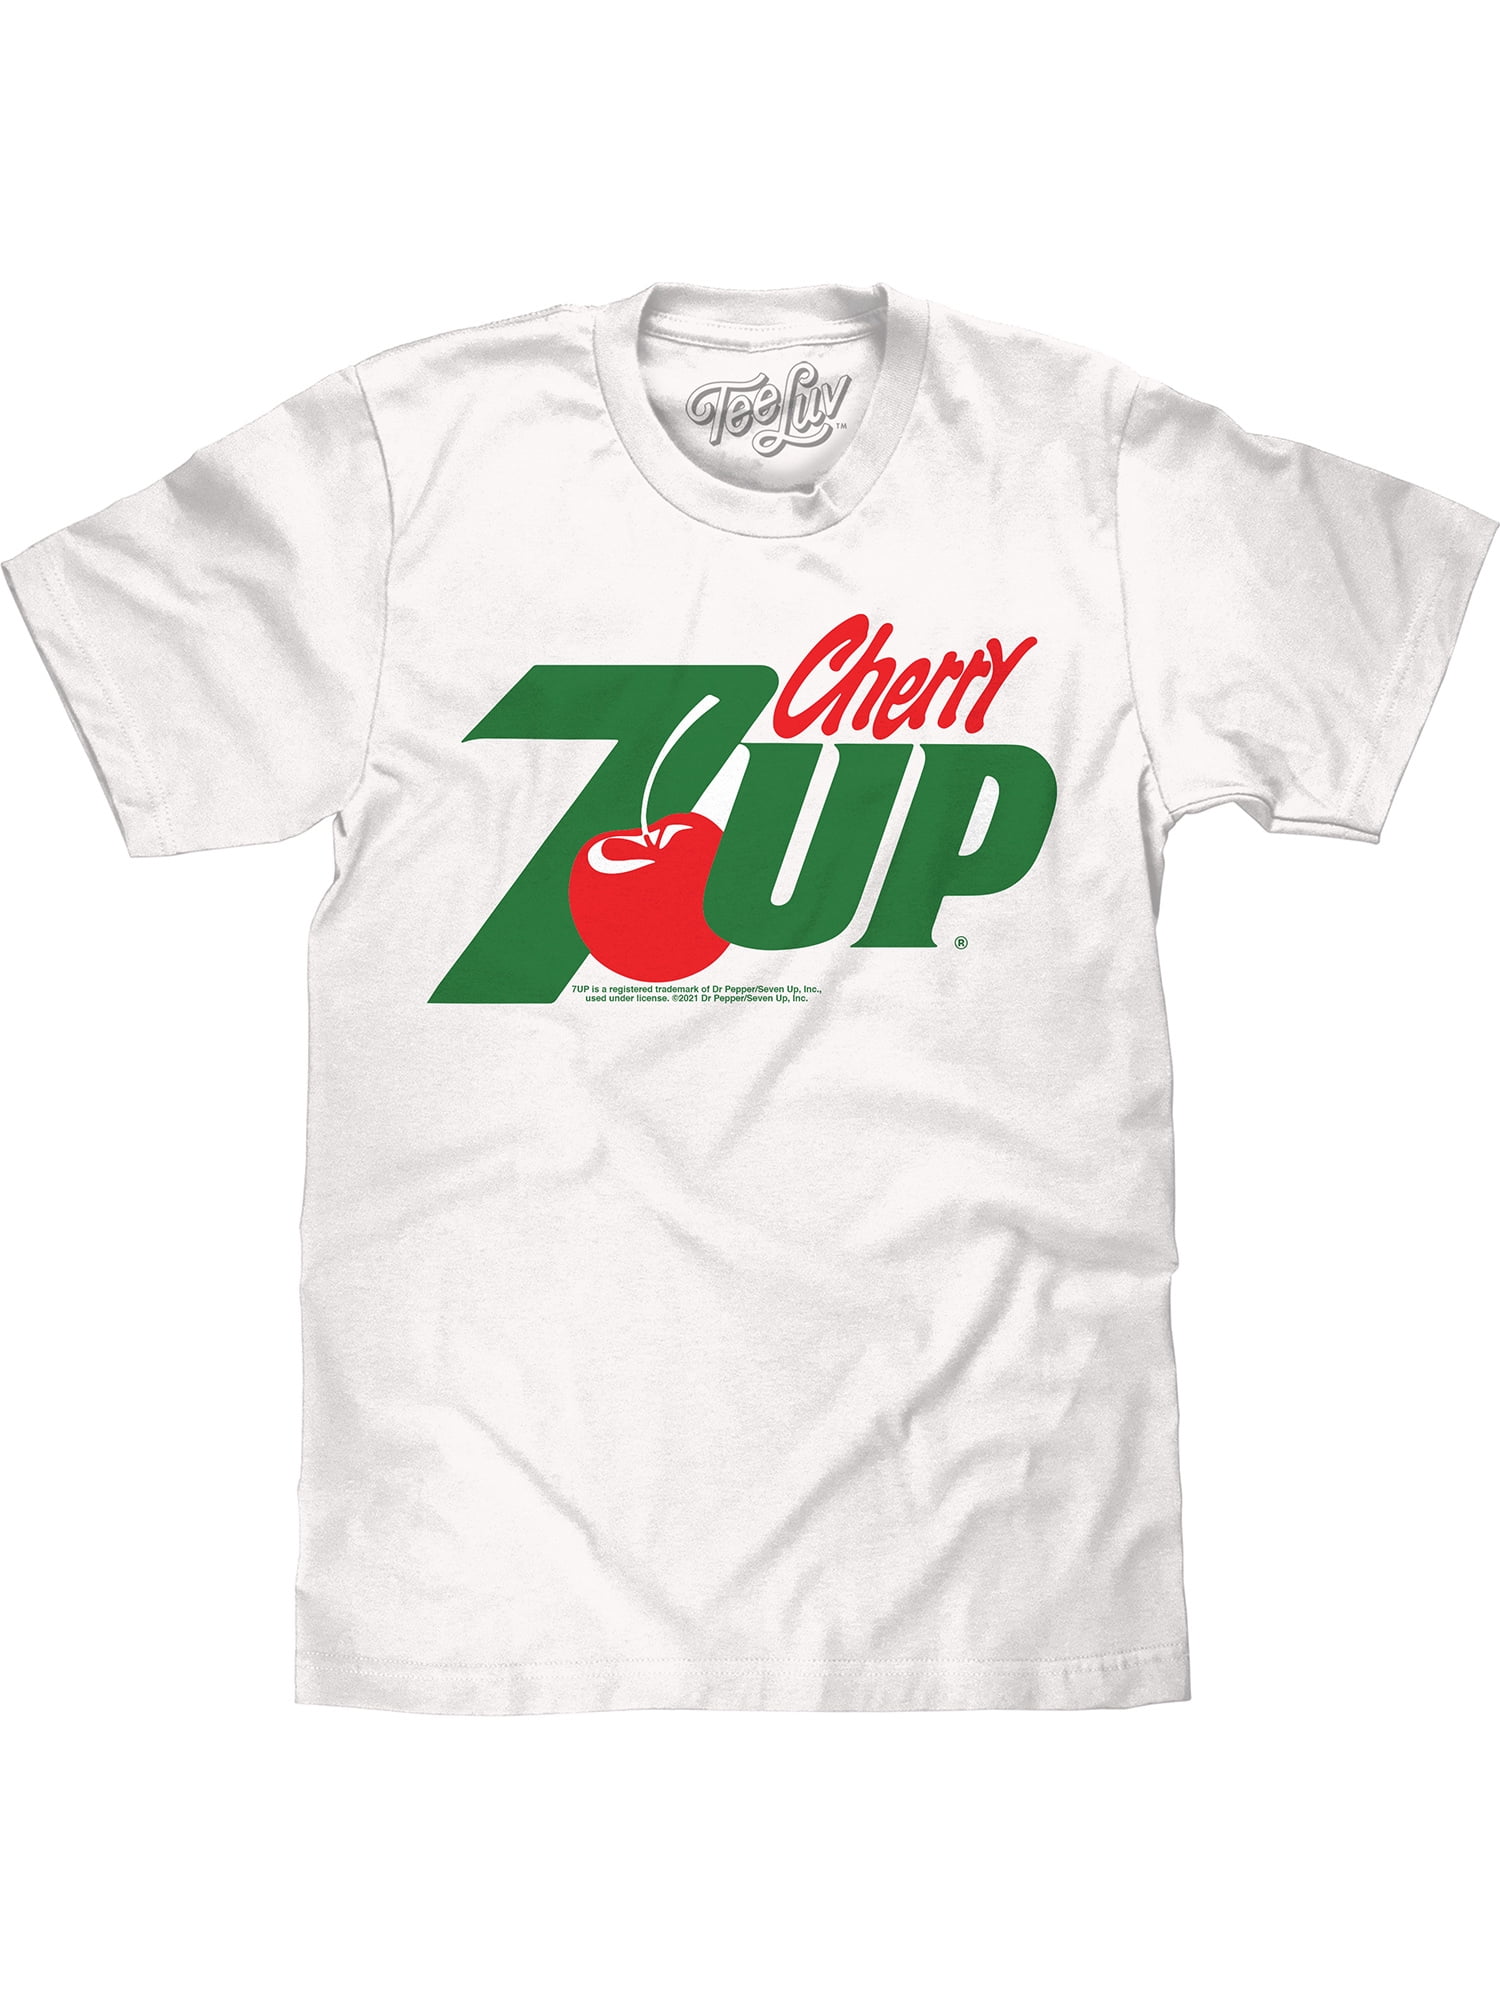 7-Up Shirt Graphic Tee 90s Vintage Sprite T-Shirt